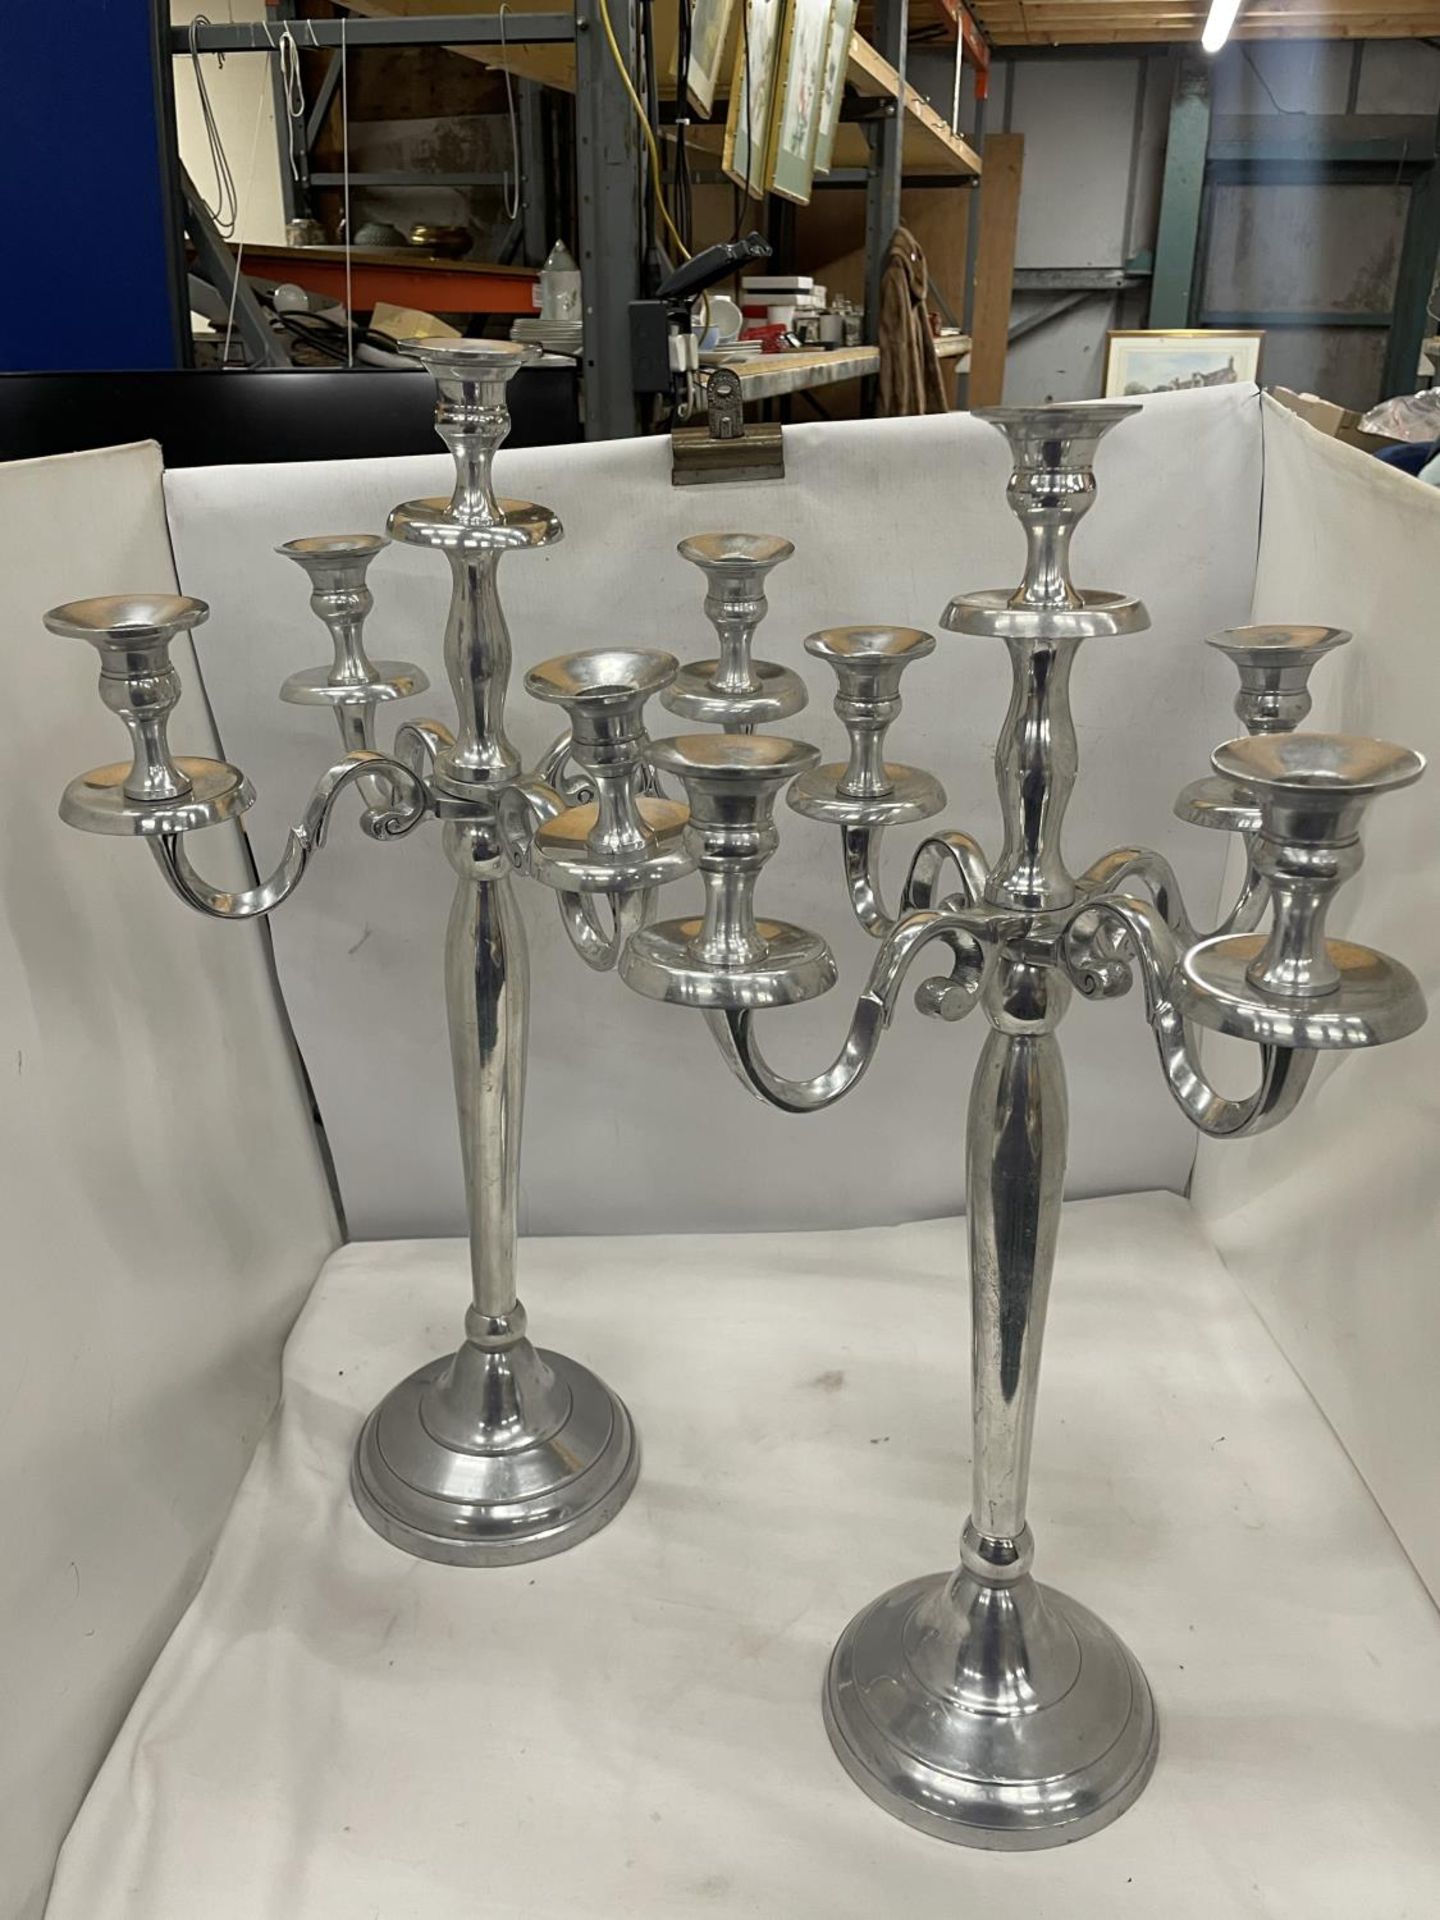 A PAIR OF TALL FIVE BRANCH CANDELABRAS